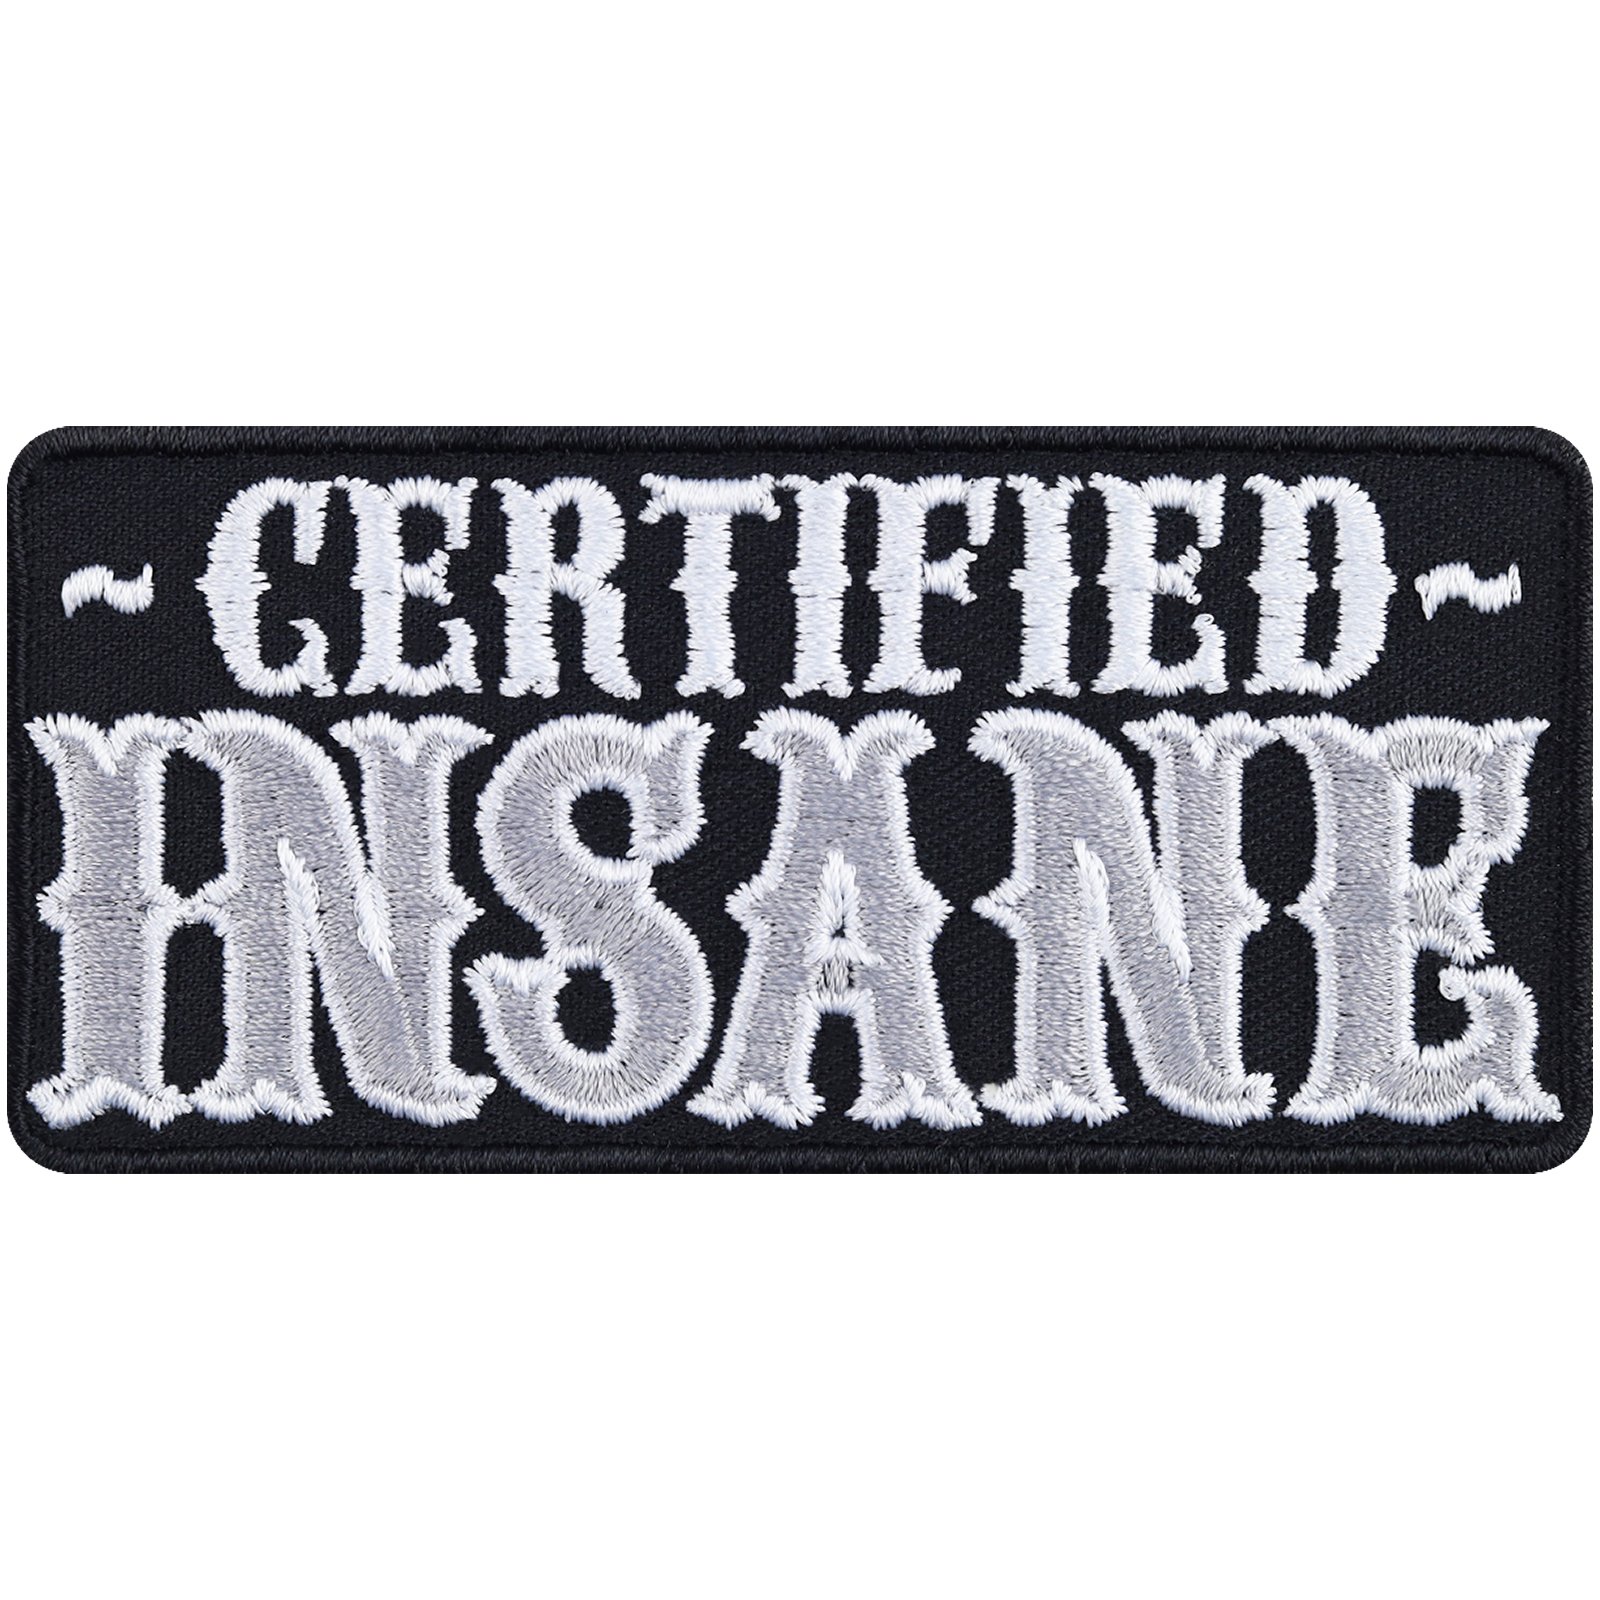 Certified insane - Patch